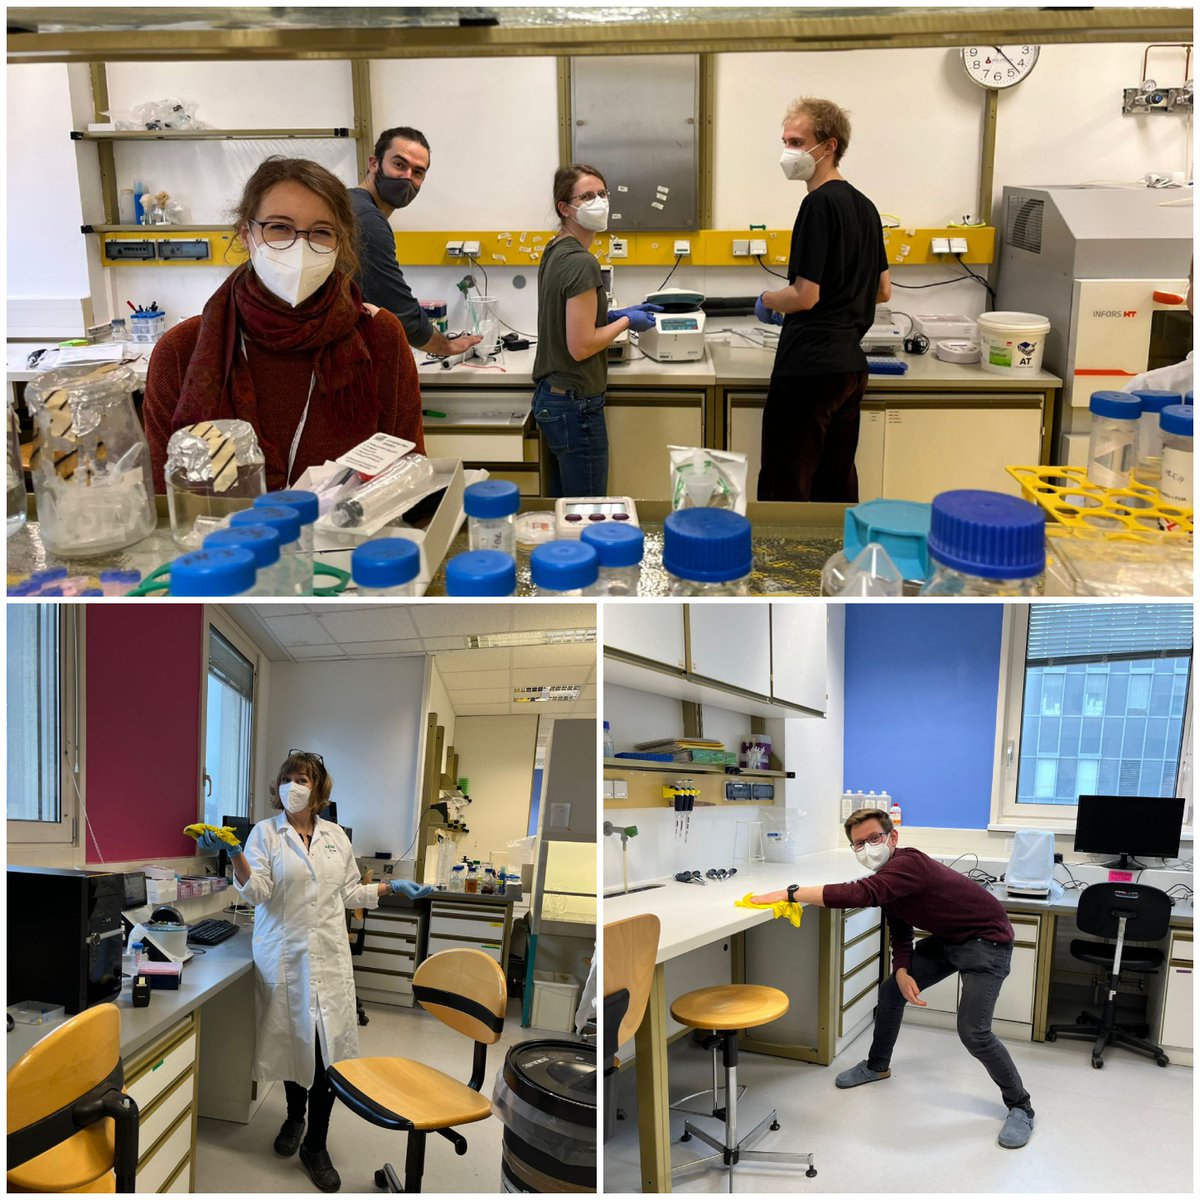 Sticking to traditions: Annual lab cleaning @BOKU_IMMB to the beat of all-time Christmas favourite songs...🎼🎄#MariahCarey